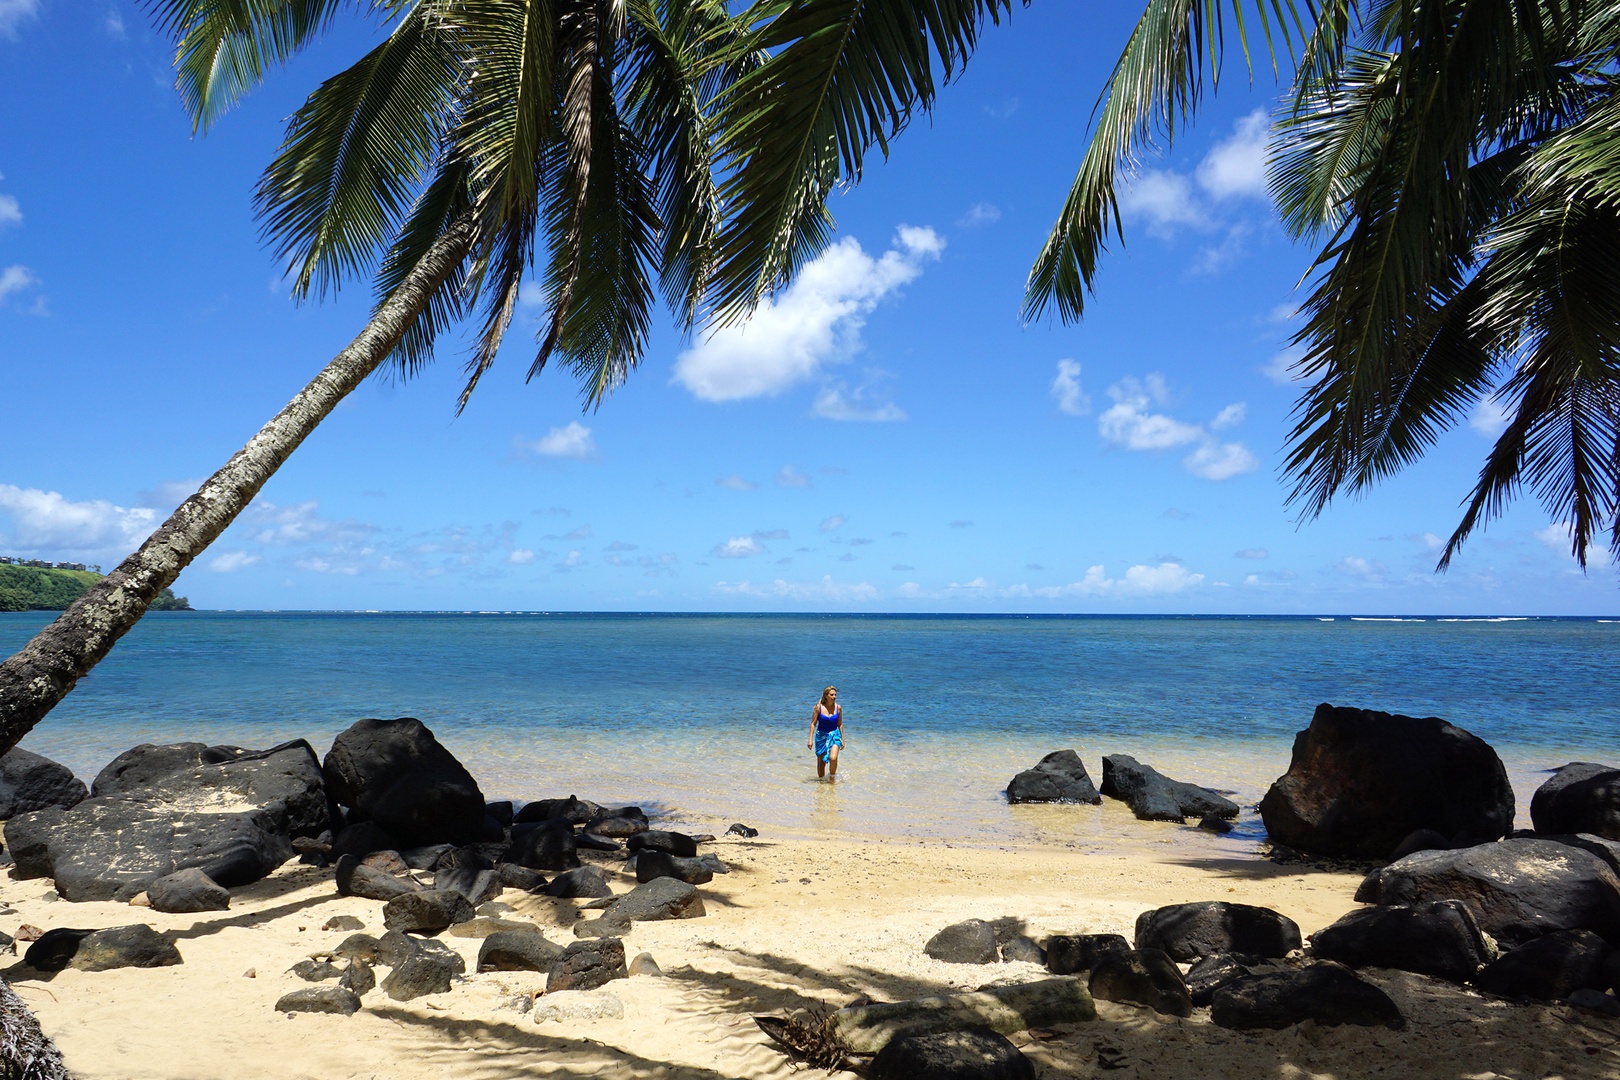 Koloa Vacation Rentals, Pili Mai 7J - Secluded beach paradise perfect for peaceful walks and quiet reflection.